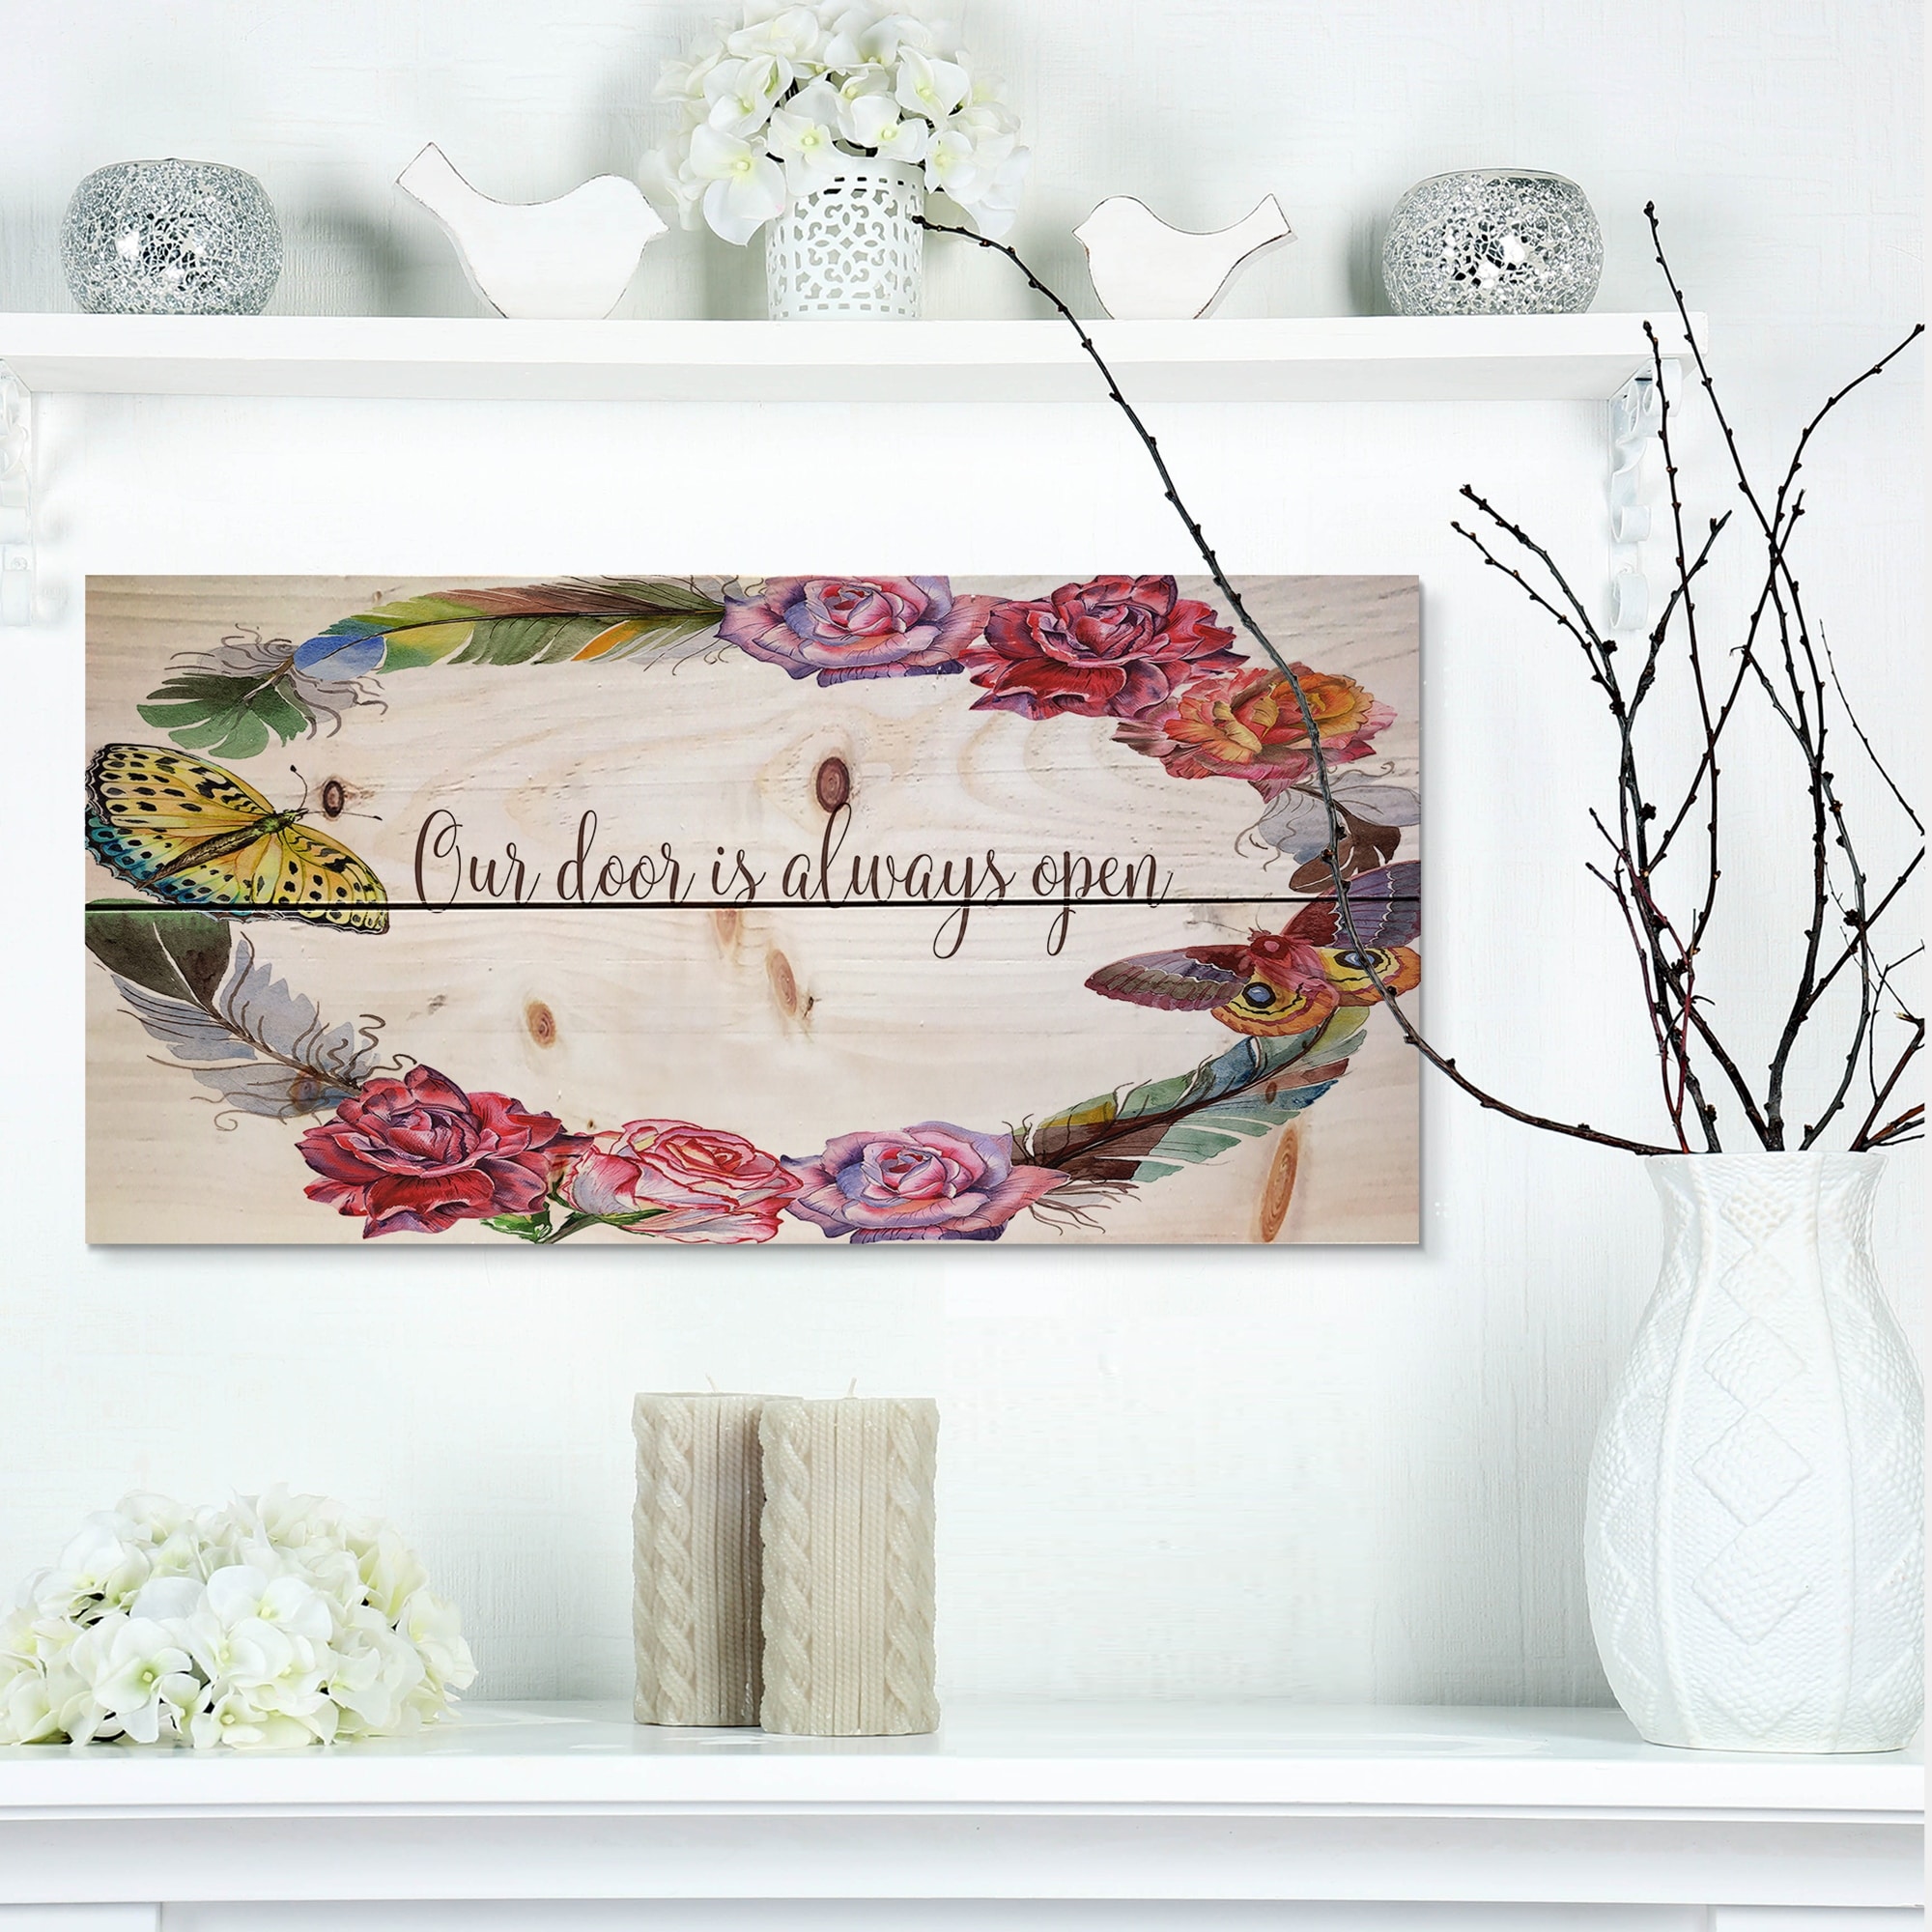 Designart 'Our door is always open. Floral' Textual Entrance Art on Wood  Wall Art Multi-color Bed Bath  Beyond 23567038